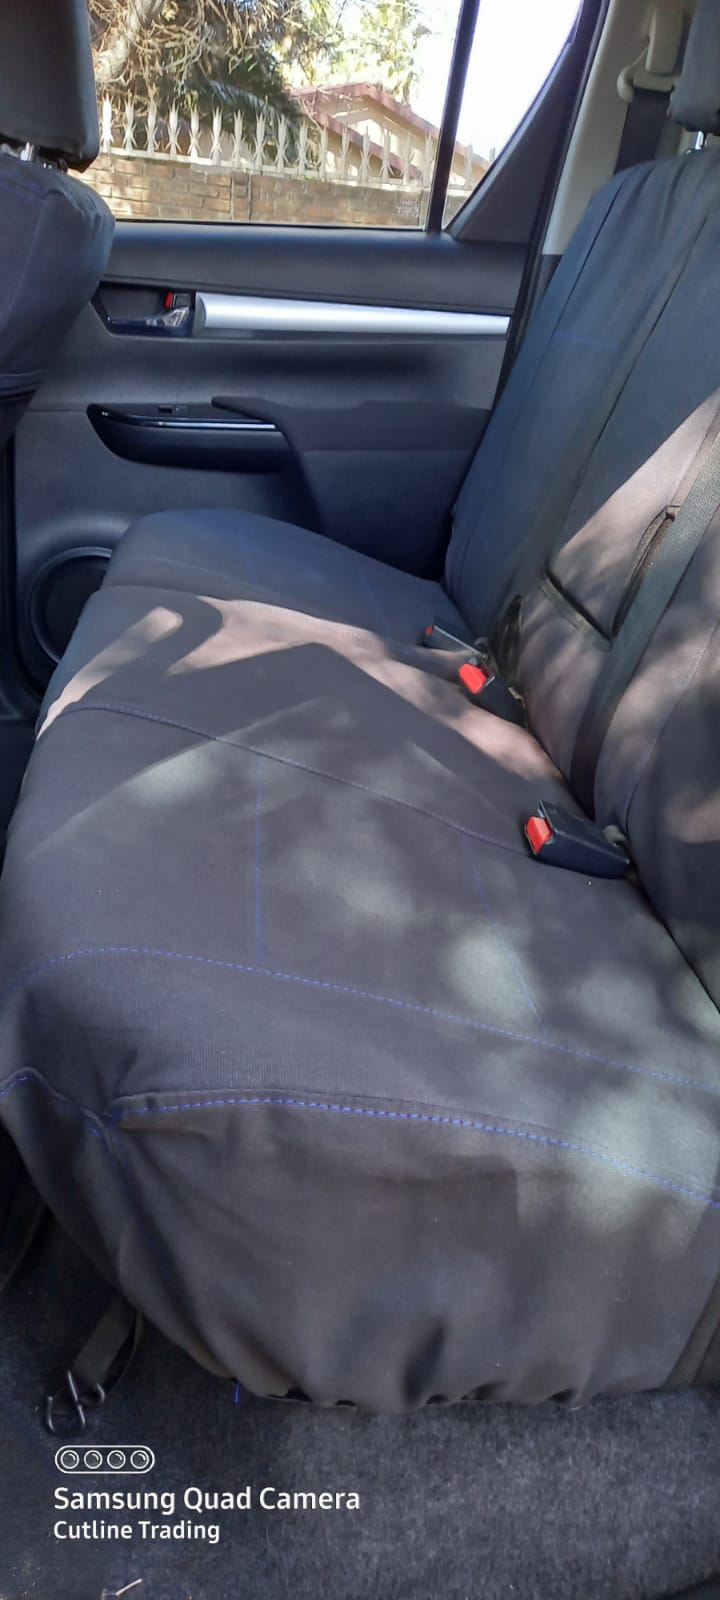 Hilux Revo seat covers